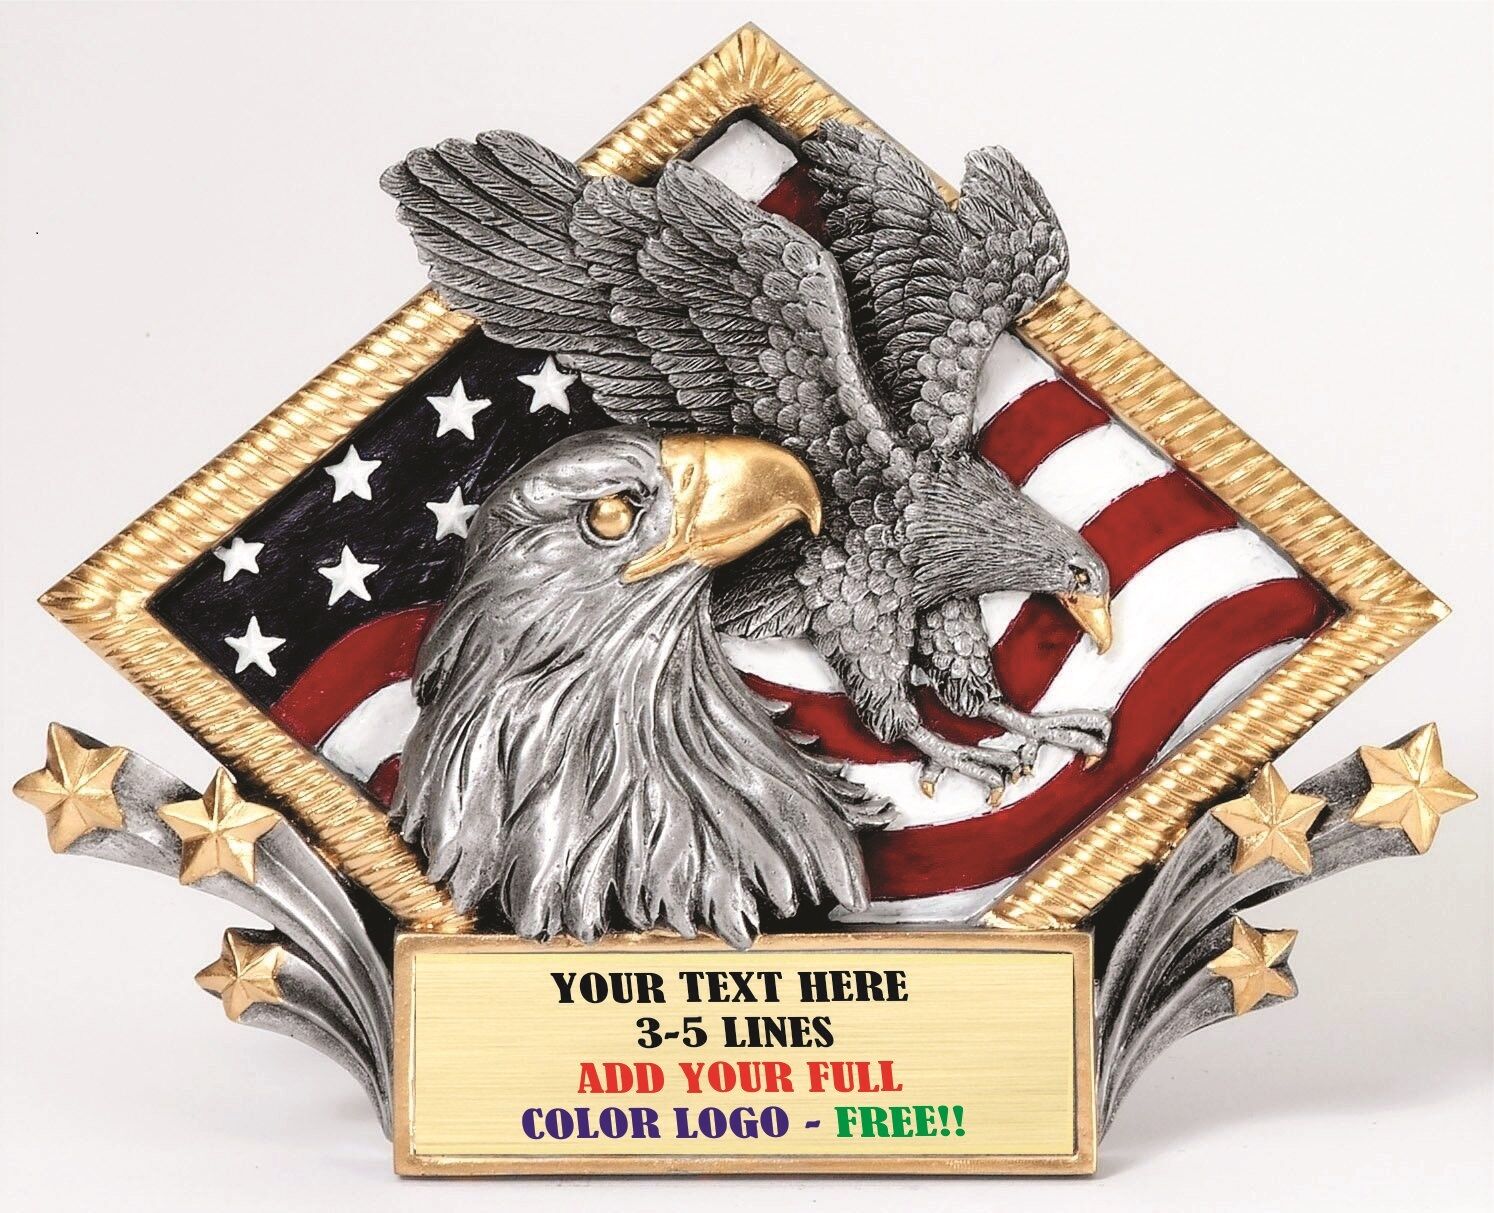 EAGLE AMERICANA RESIN TROPHY AWARD MILITARY POLICE FIRE FREE LETTERING MRDP08 ^